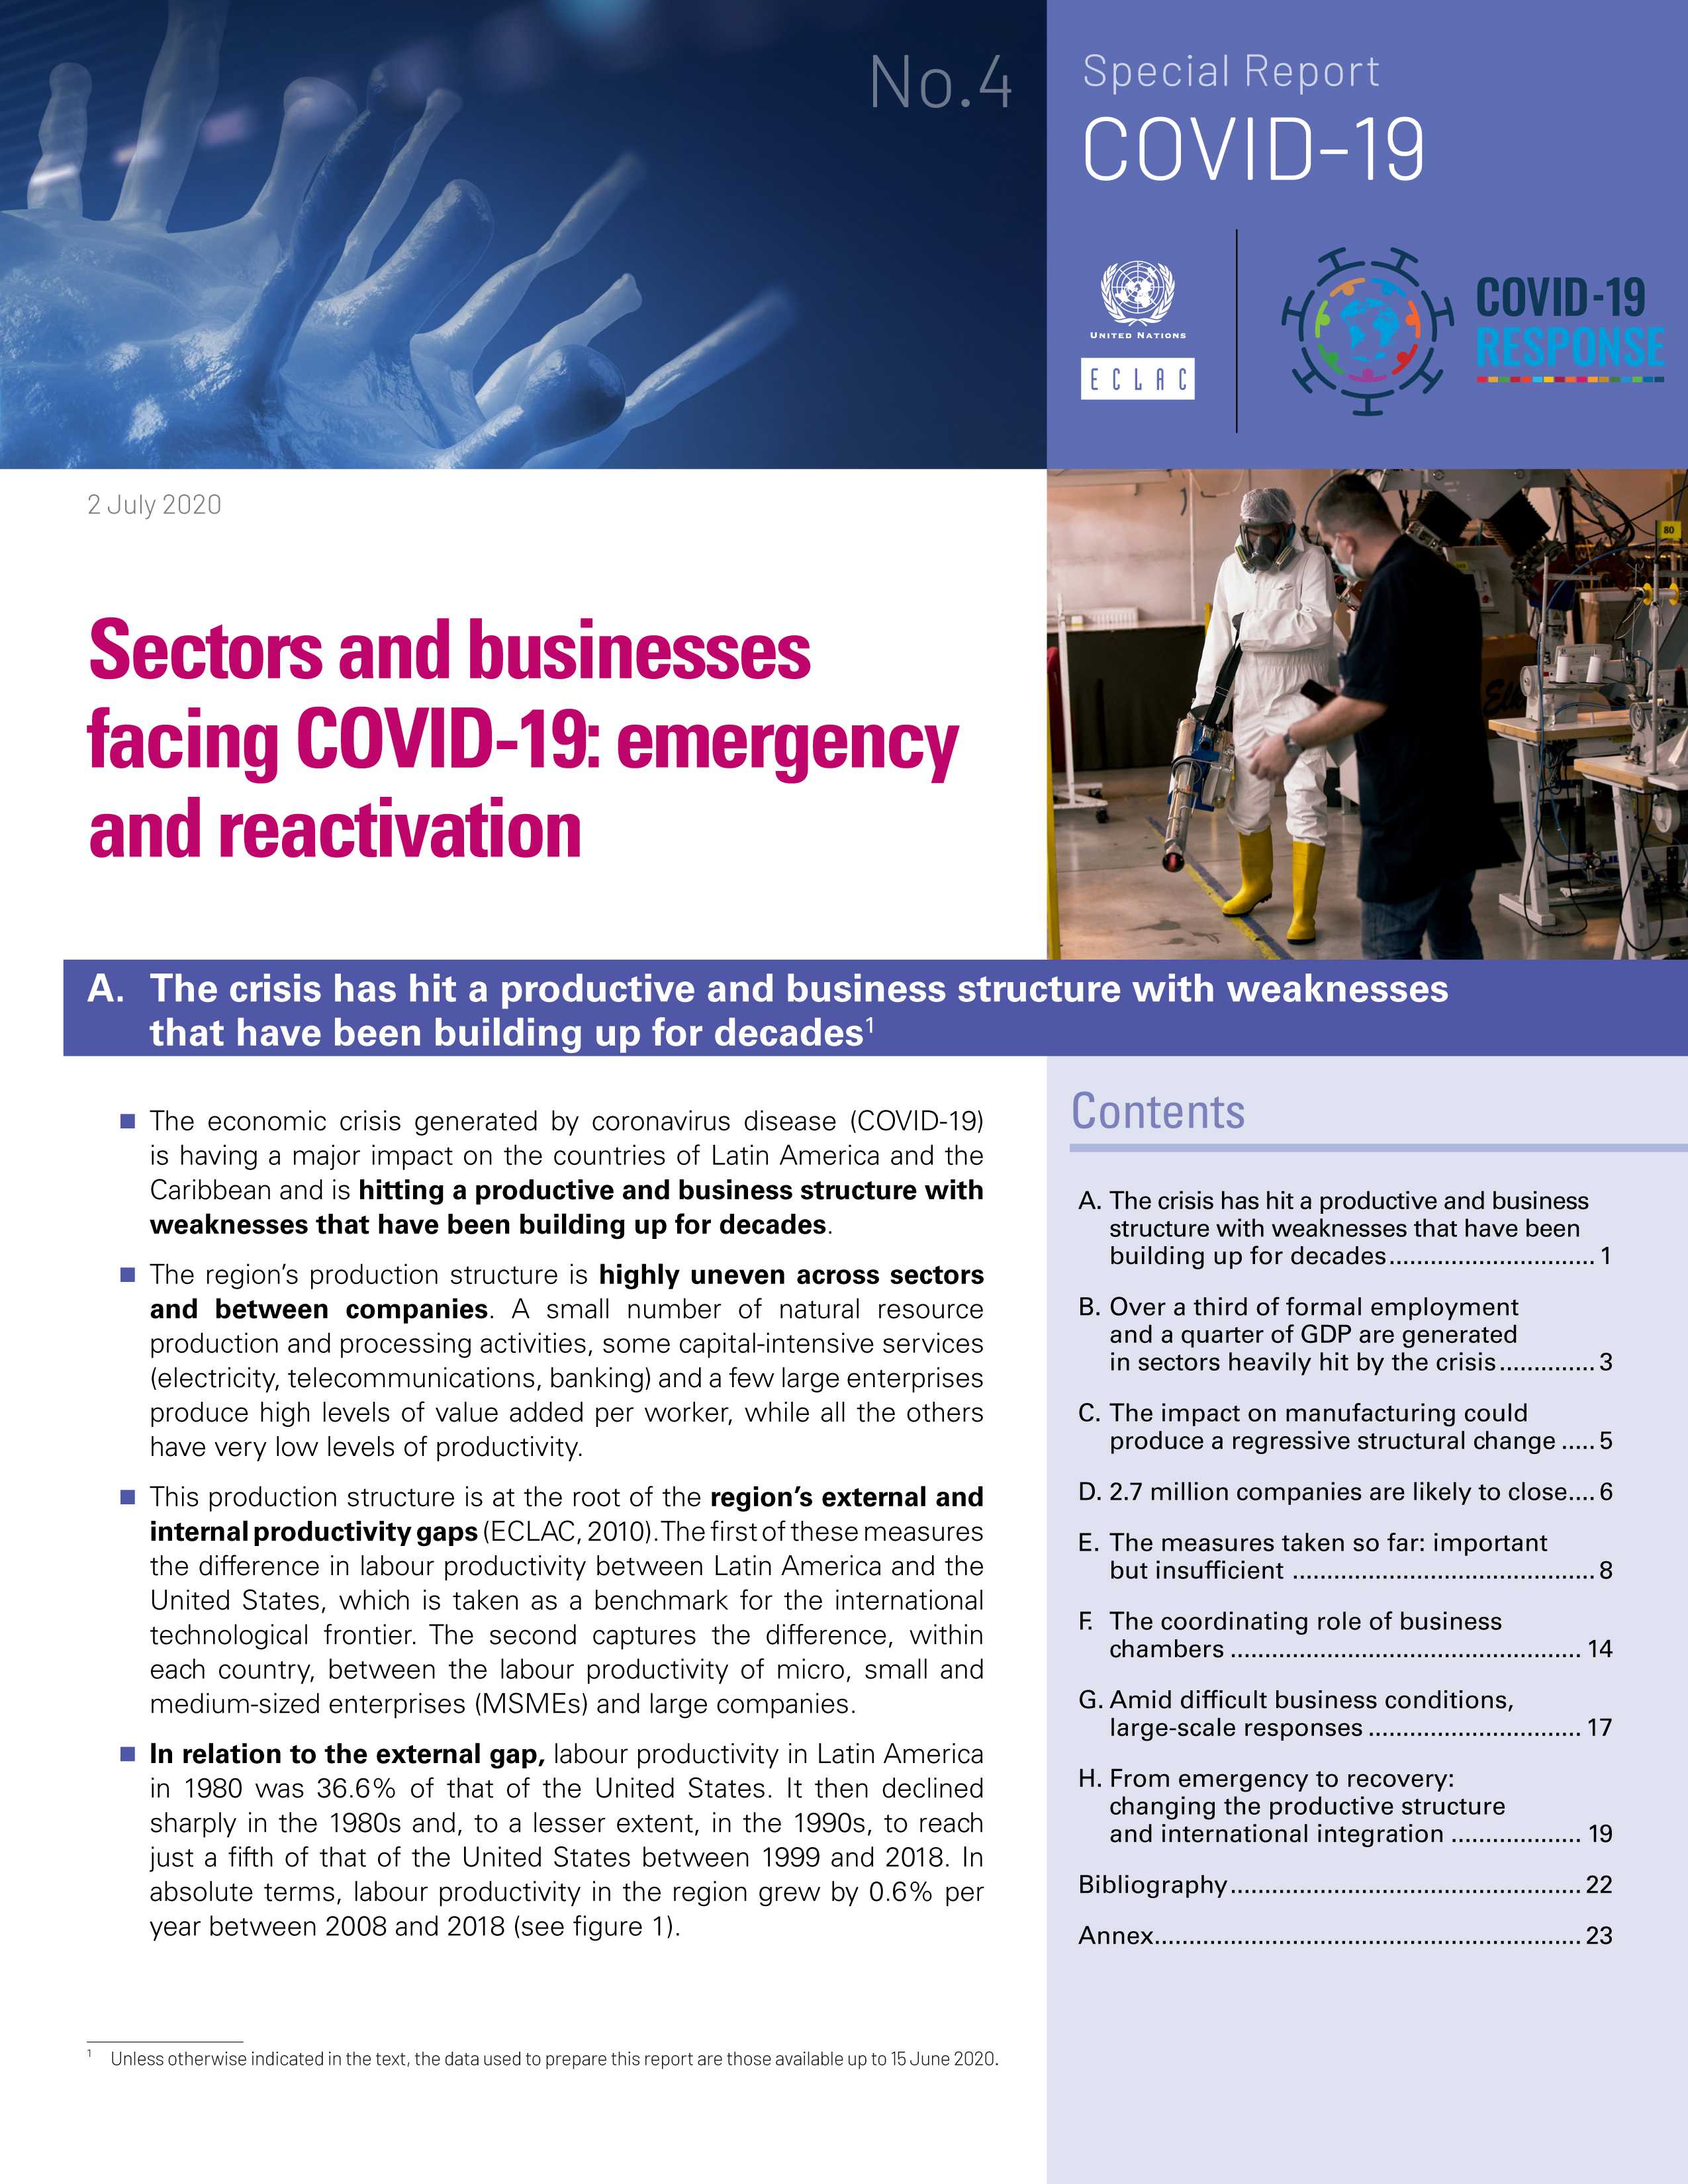 image of Sectors and Businesses Facing COVID-19: Emergency and Reactivation